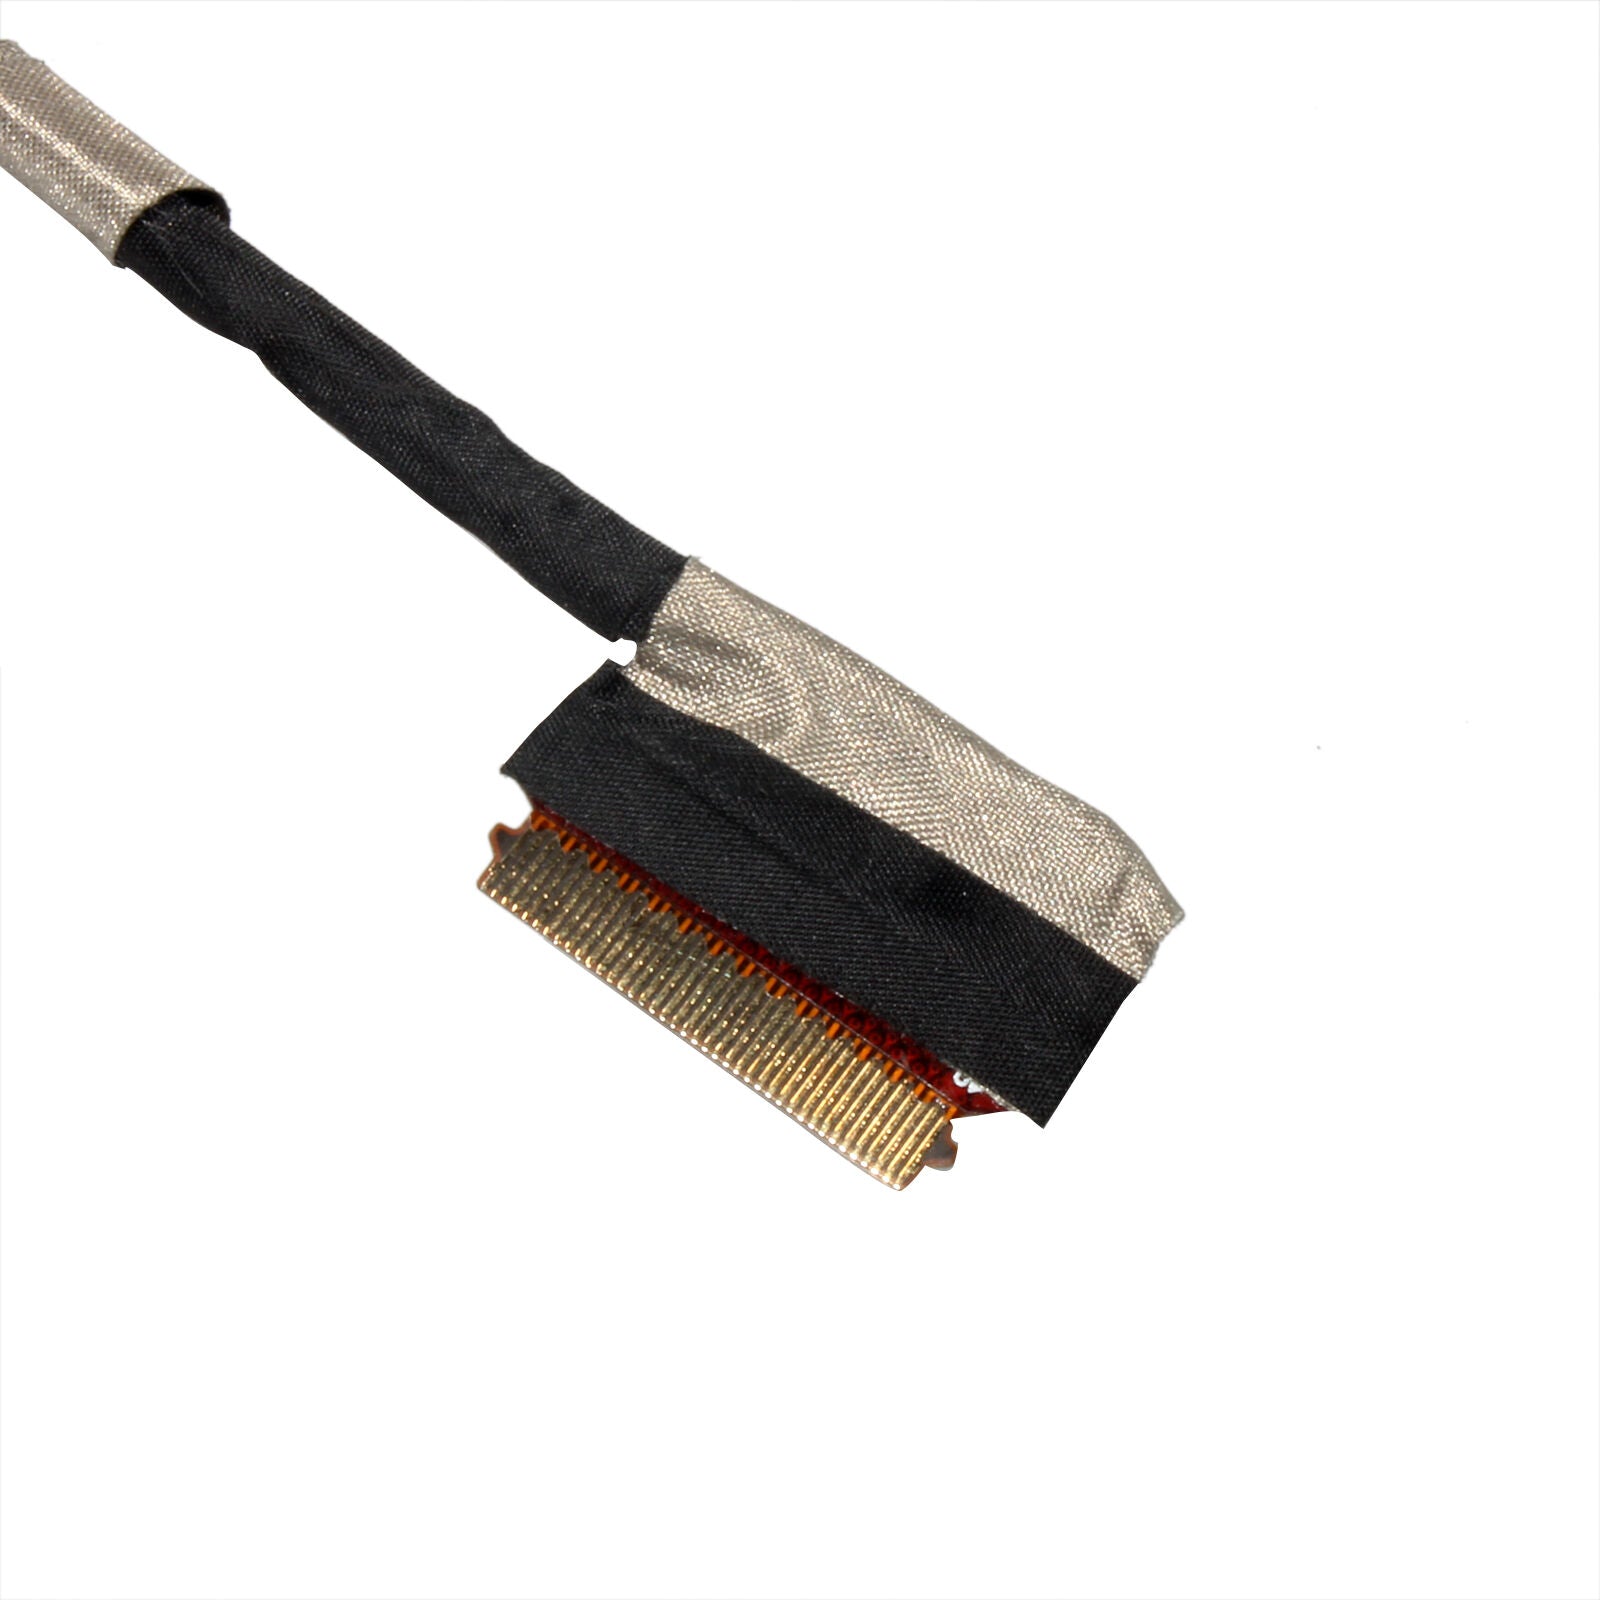 Lenovo 5H50F76792 LCD Display Video Cable 30-Pin Flex 2-15 2-15D 20377 460.00Z0H.0003